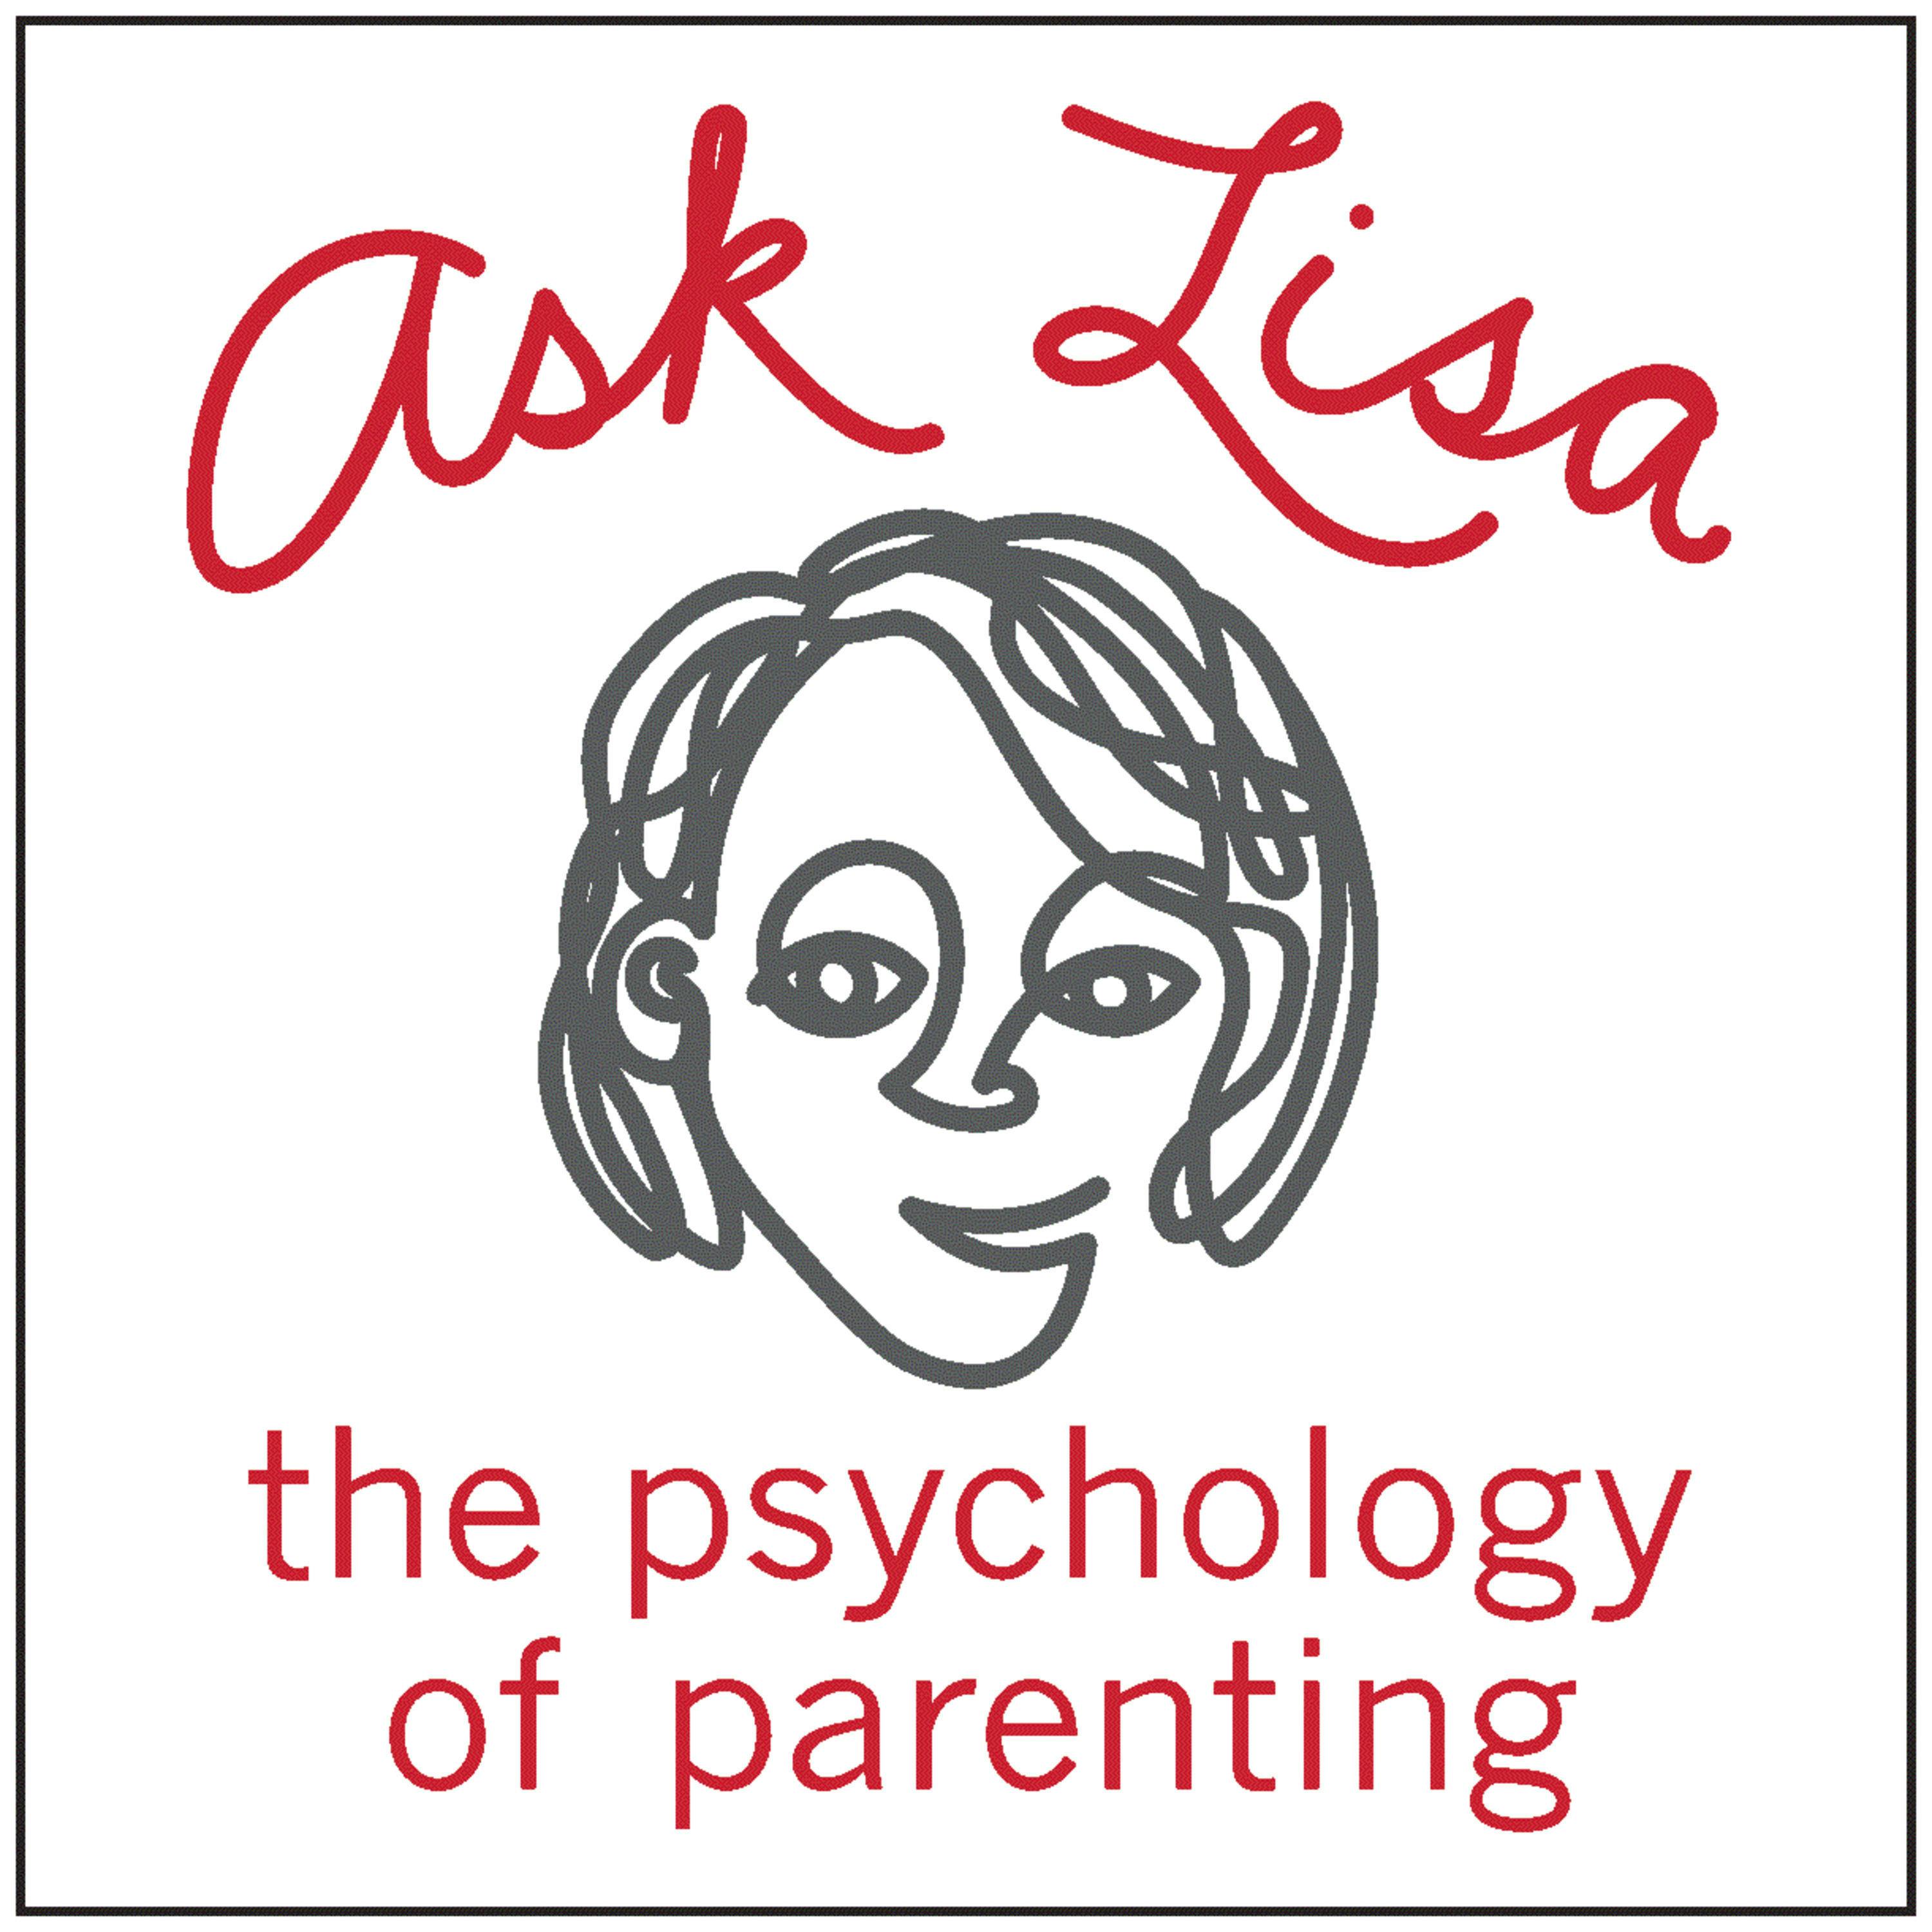 79: What Do Parents Need to Know about Suicide?